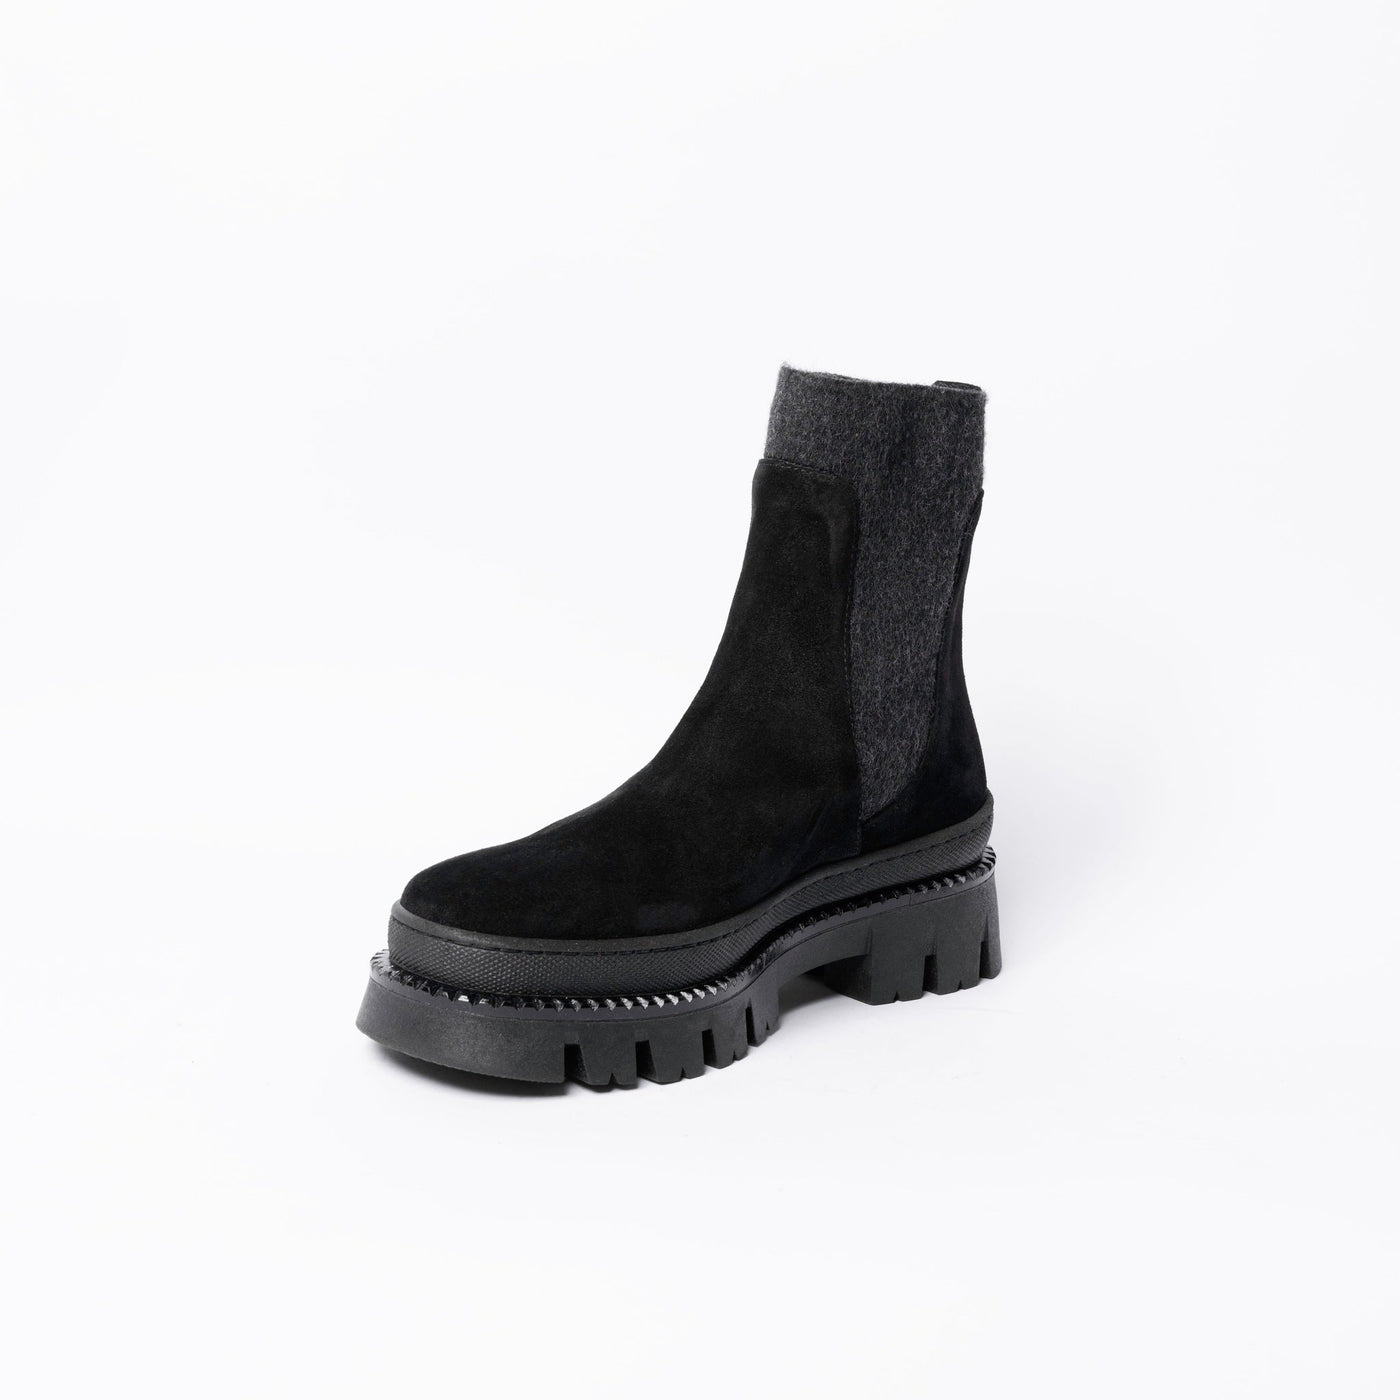 Ankle boots in black suede with chunky rubber soles. .